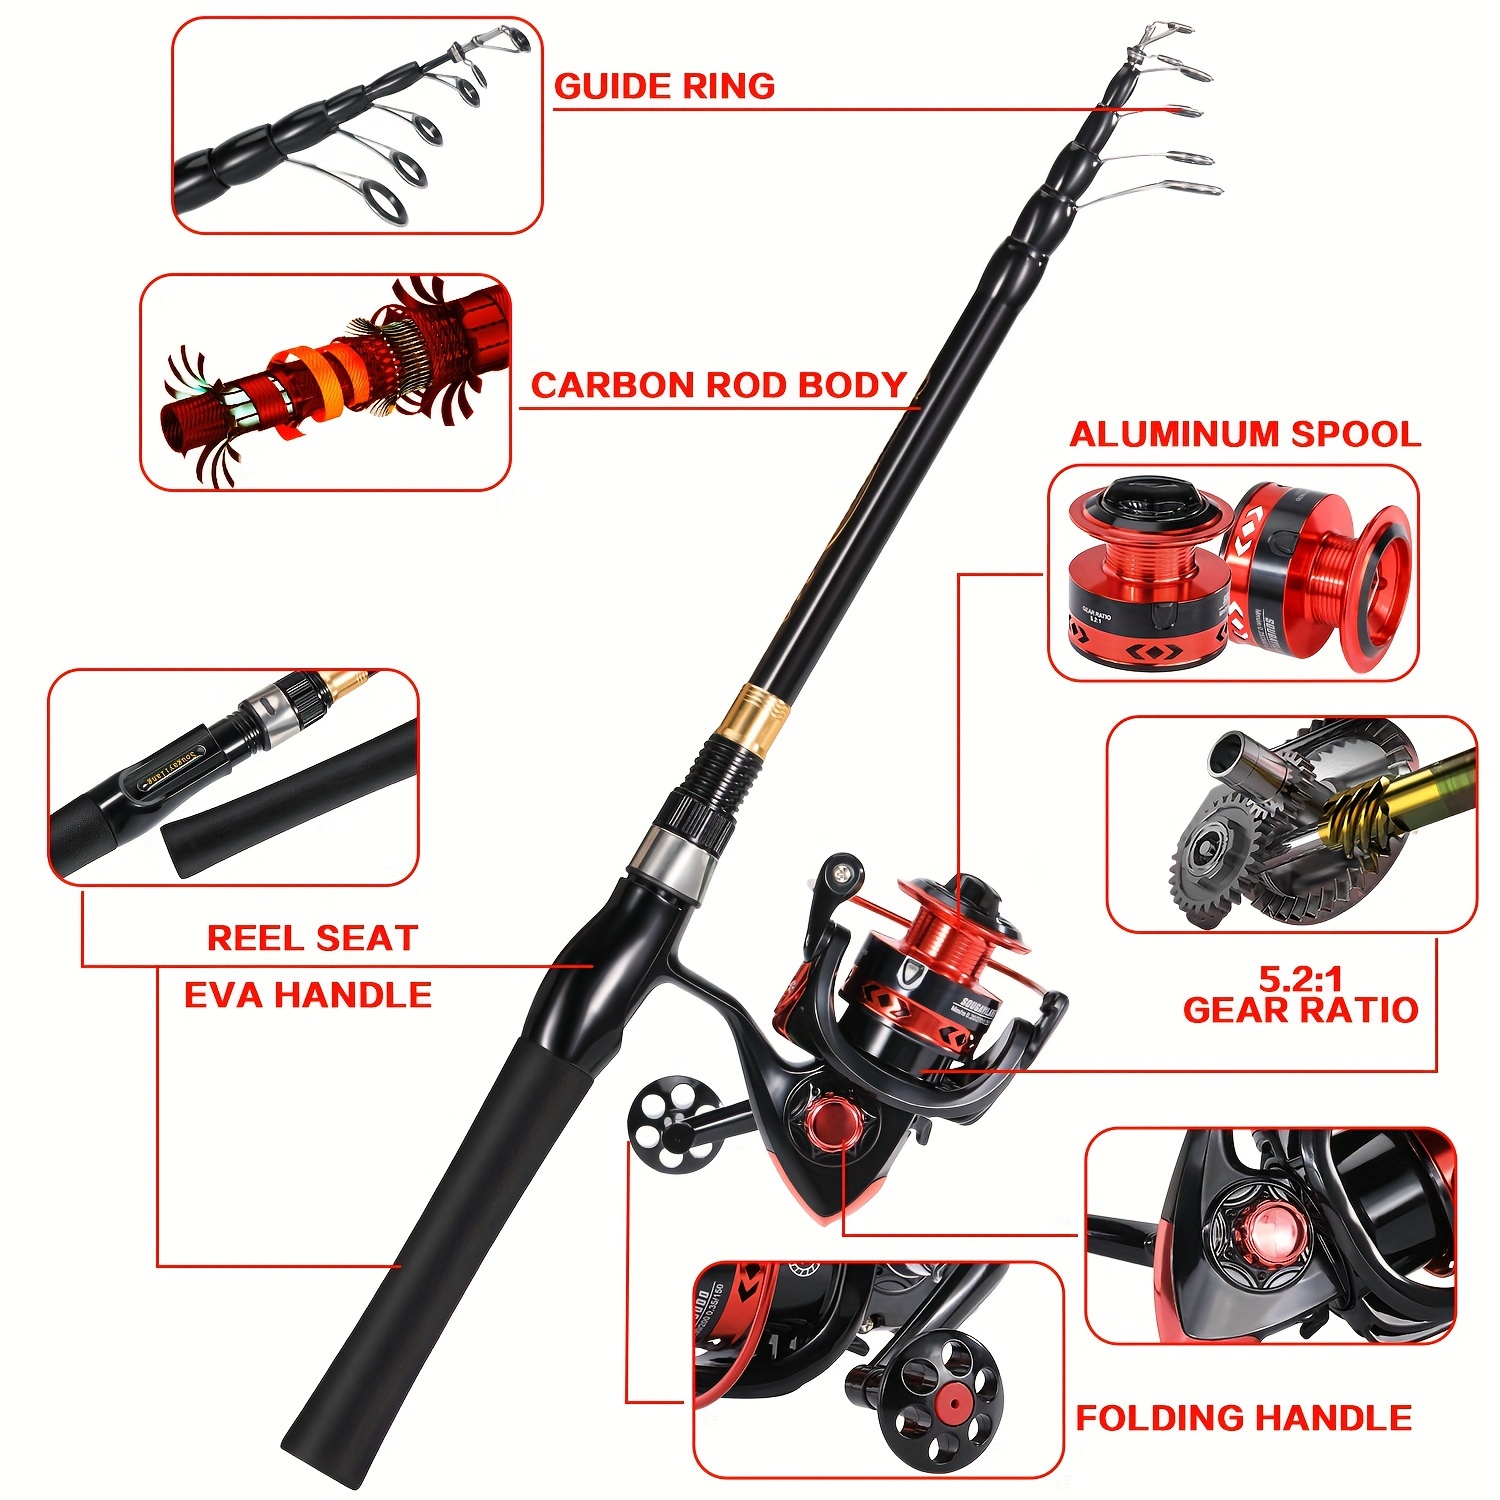 Sougayilang Fishing Rods Combos 1.8-2.7M Carbon Fiber Telescopic Fishing  Rods and Spinning Fishing Reel Line Bag Lures Full Set